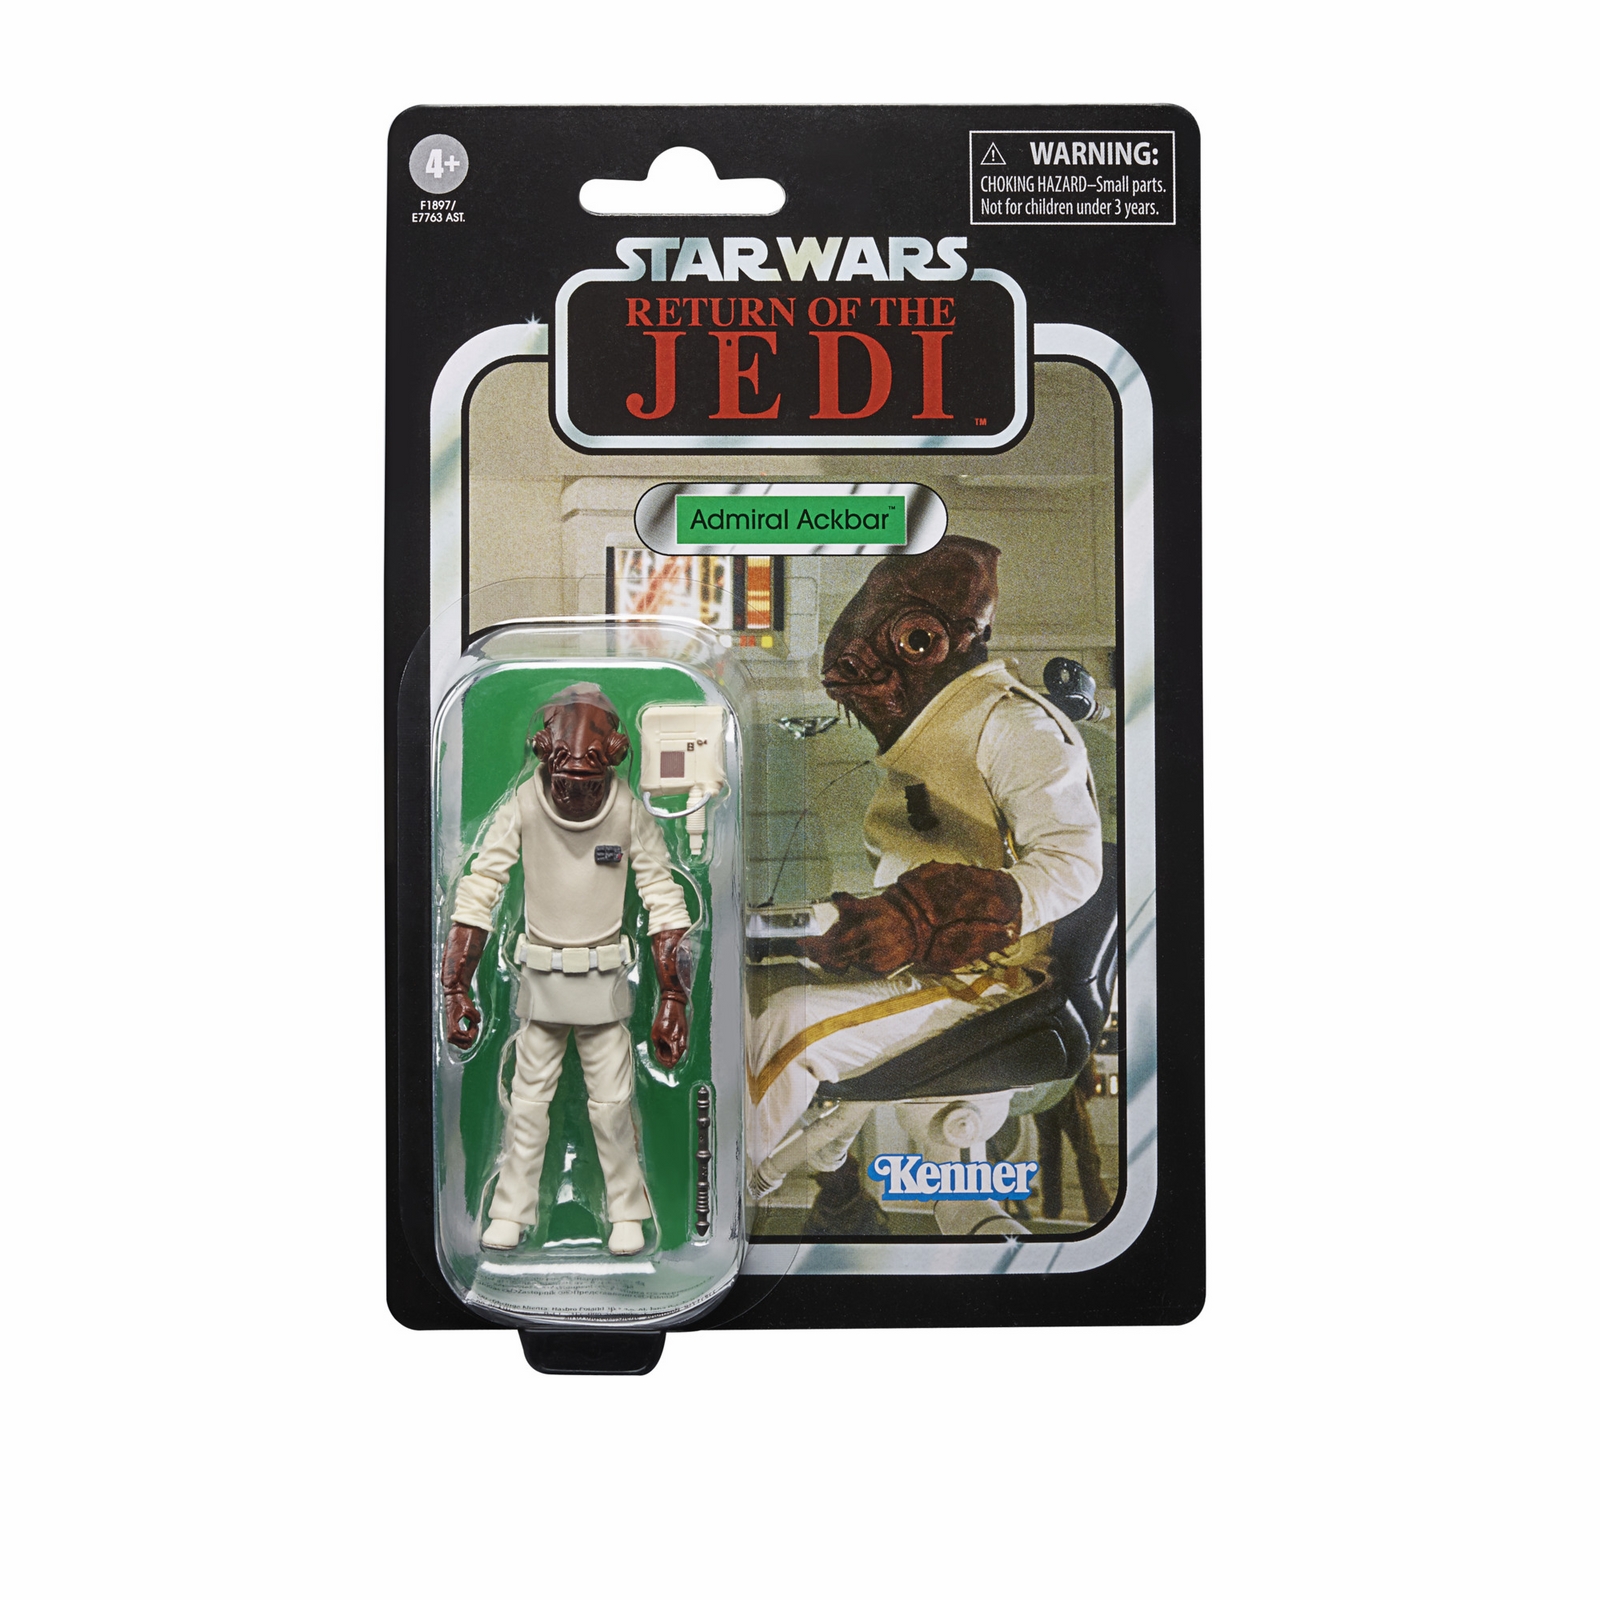 STAR WARS THE VINTAGE COLLECTION 3.75-INCH ADMIRAL ACKBAR Figure - in pck (2).jpg